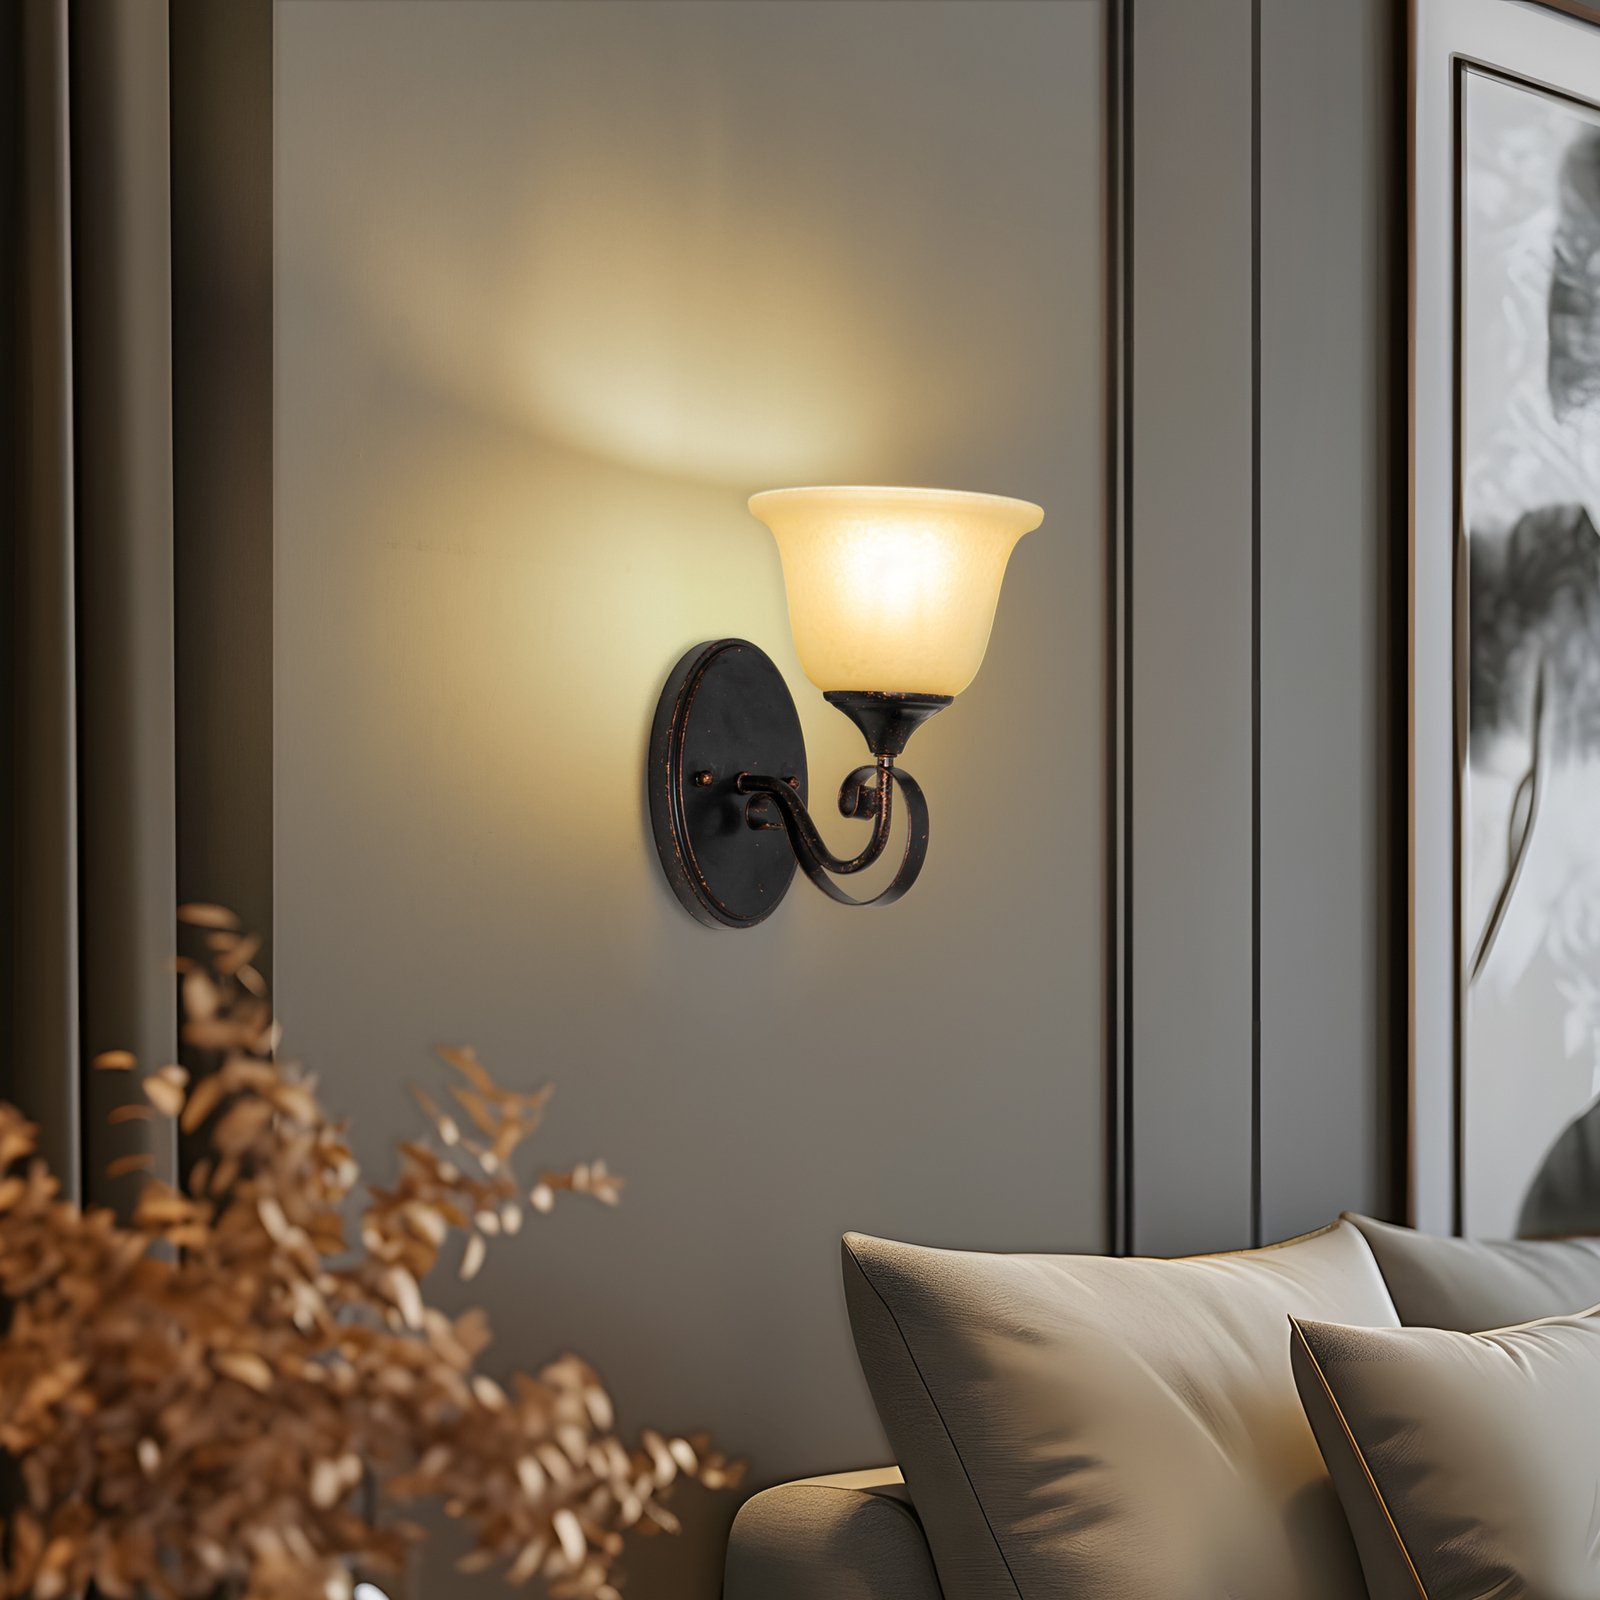 Svera wall lamp in a country house style, E27